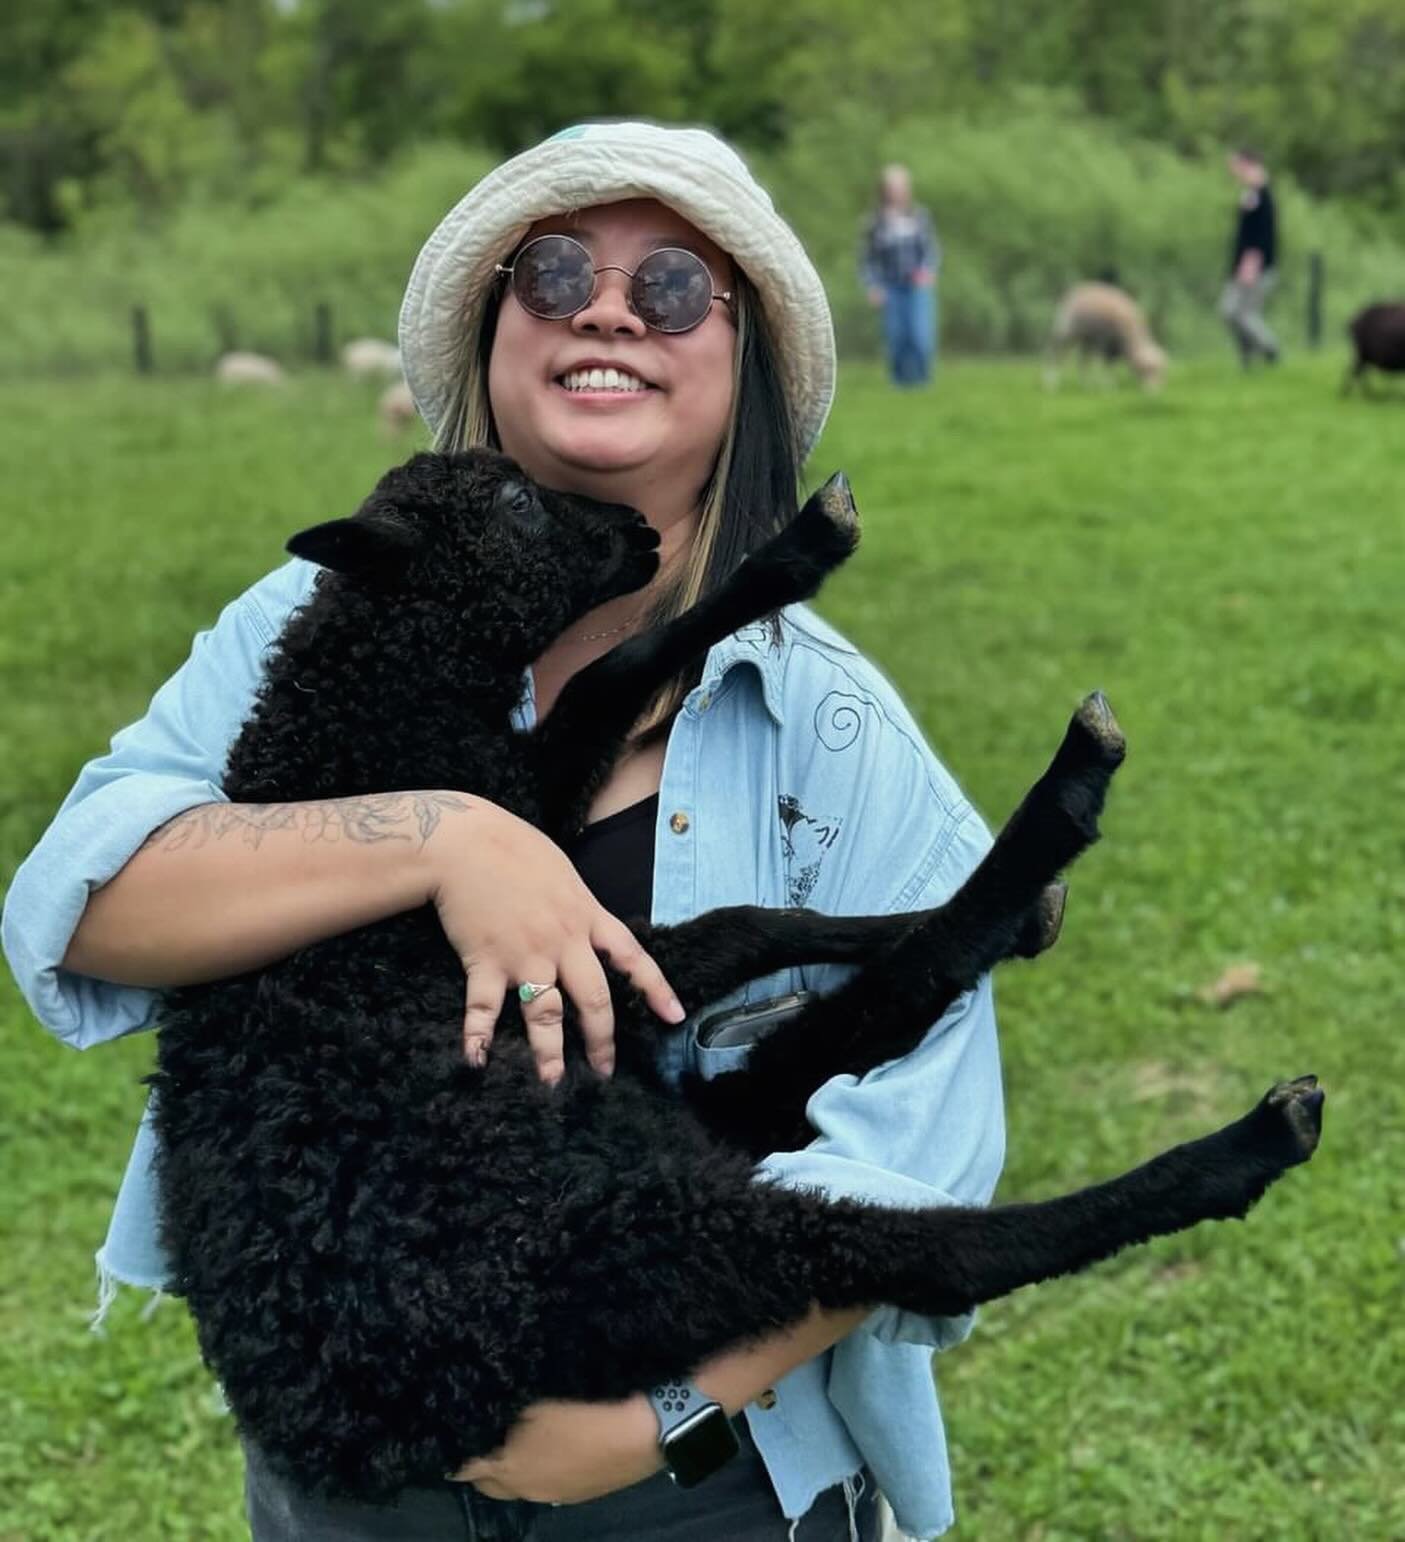 I held a lamb today and it was magical. The snuggles were so precious 🥹 Thank you @fiberclubdetroit for organizing this field trip to @mitchellwoolco! I&rsquo;m a huge fan of processes and learning how things are made.  Sherry welcomed us onto the f